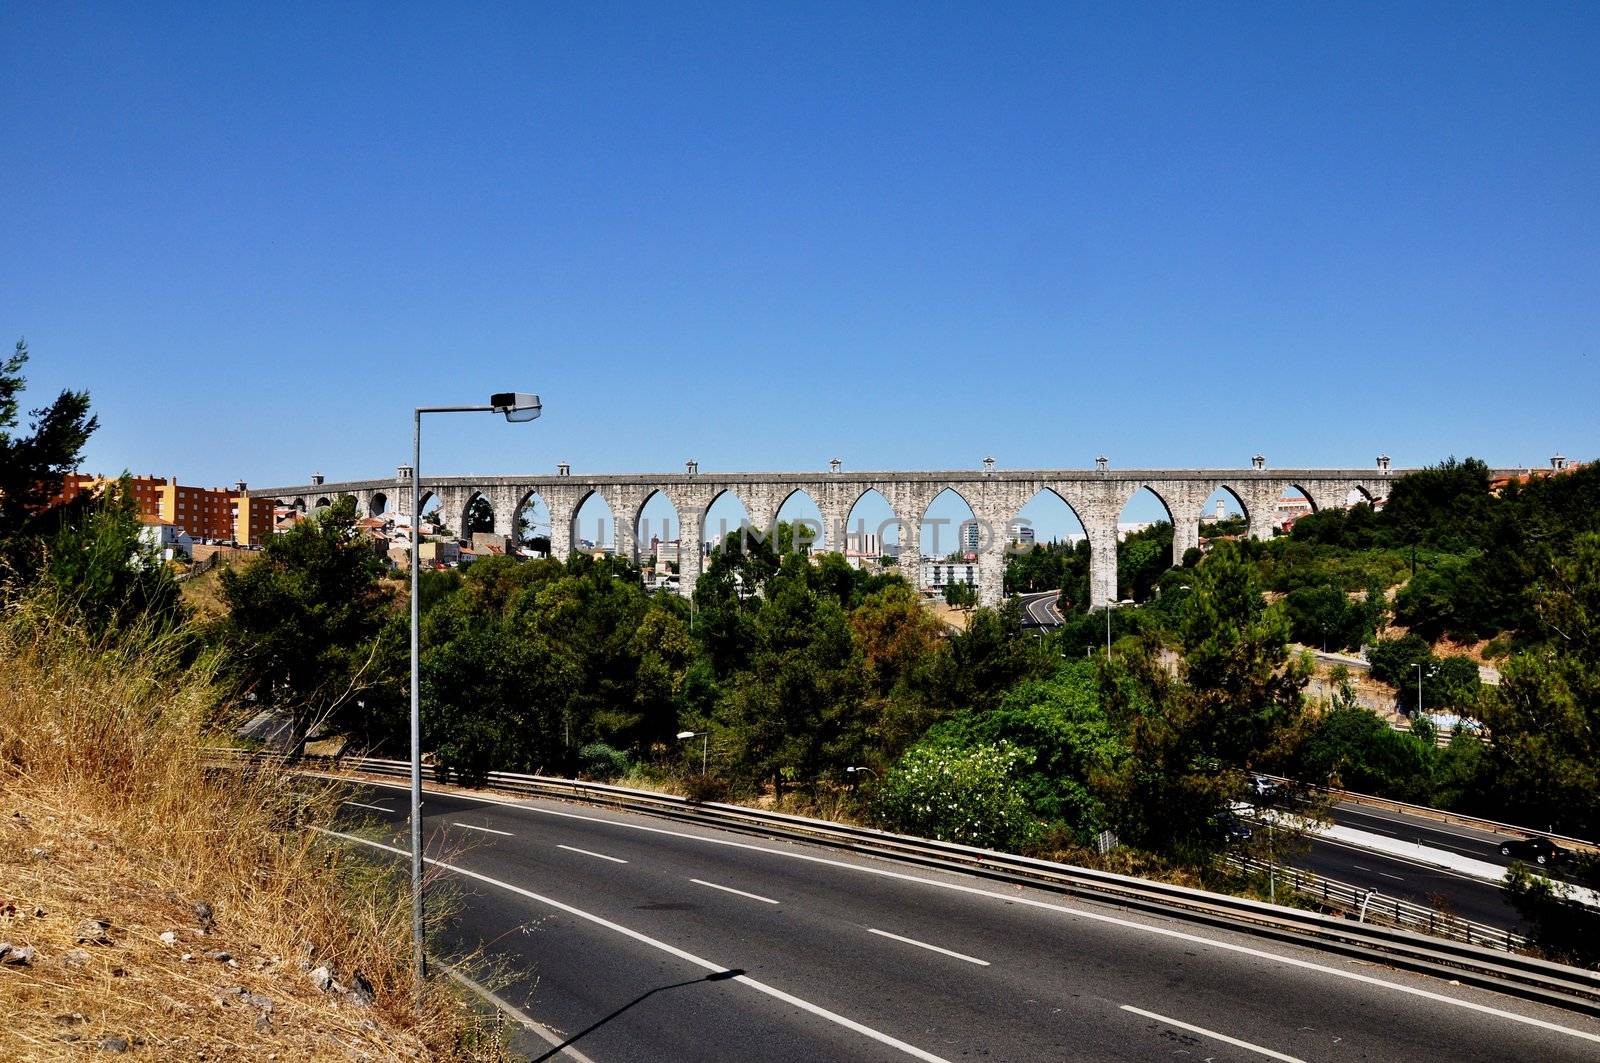 The Águas Livres Aqueduct has been supplying the town of Lisbon of its waters since 1748 and it is considered to be one of the most remarkable examples of 18th-century Portuguese engineering.Its construction was ordered by king João the 5th.The tallest arches reach a height of 65 m.Of arches in Gothic style. It is considered to be a masterpiece of engineering of the Baroque period.